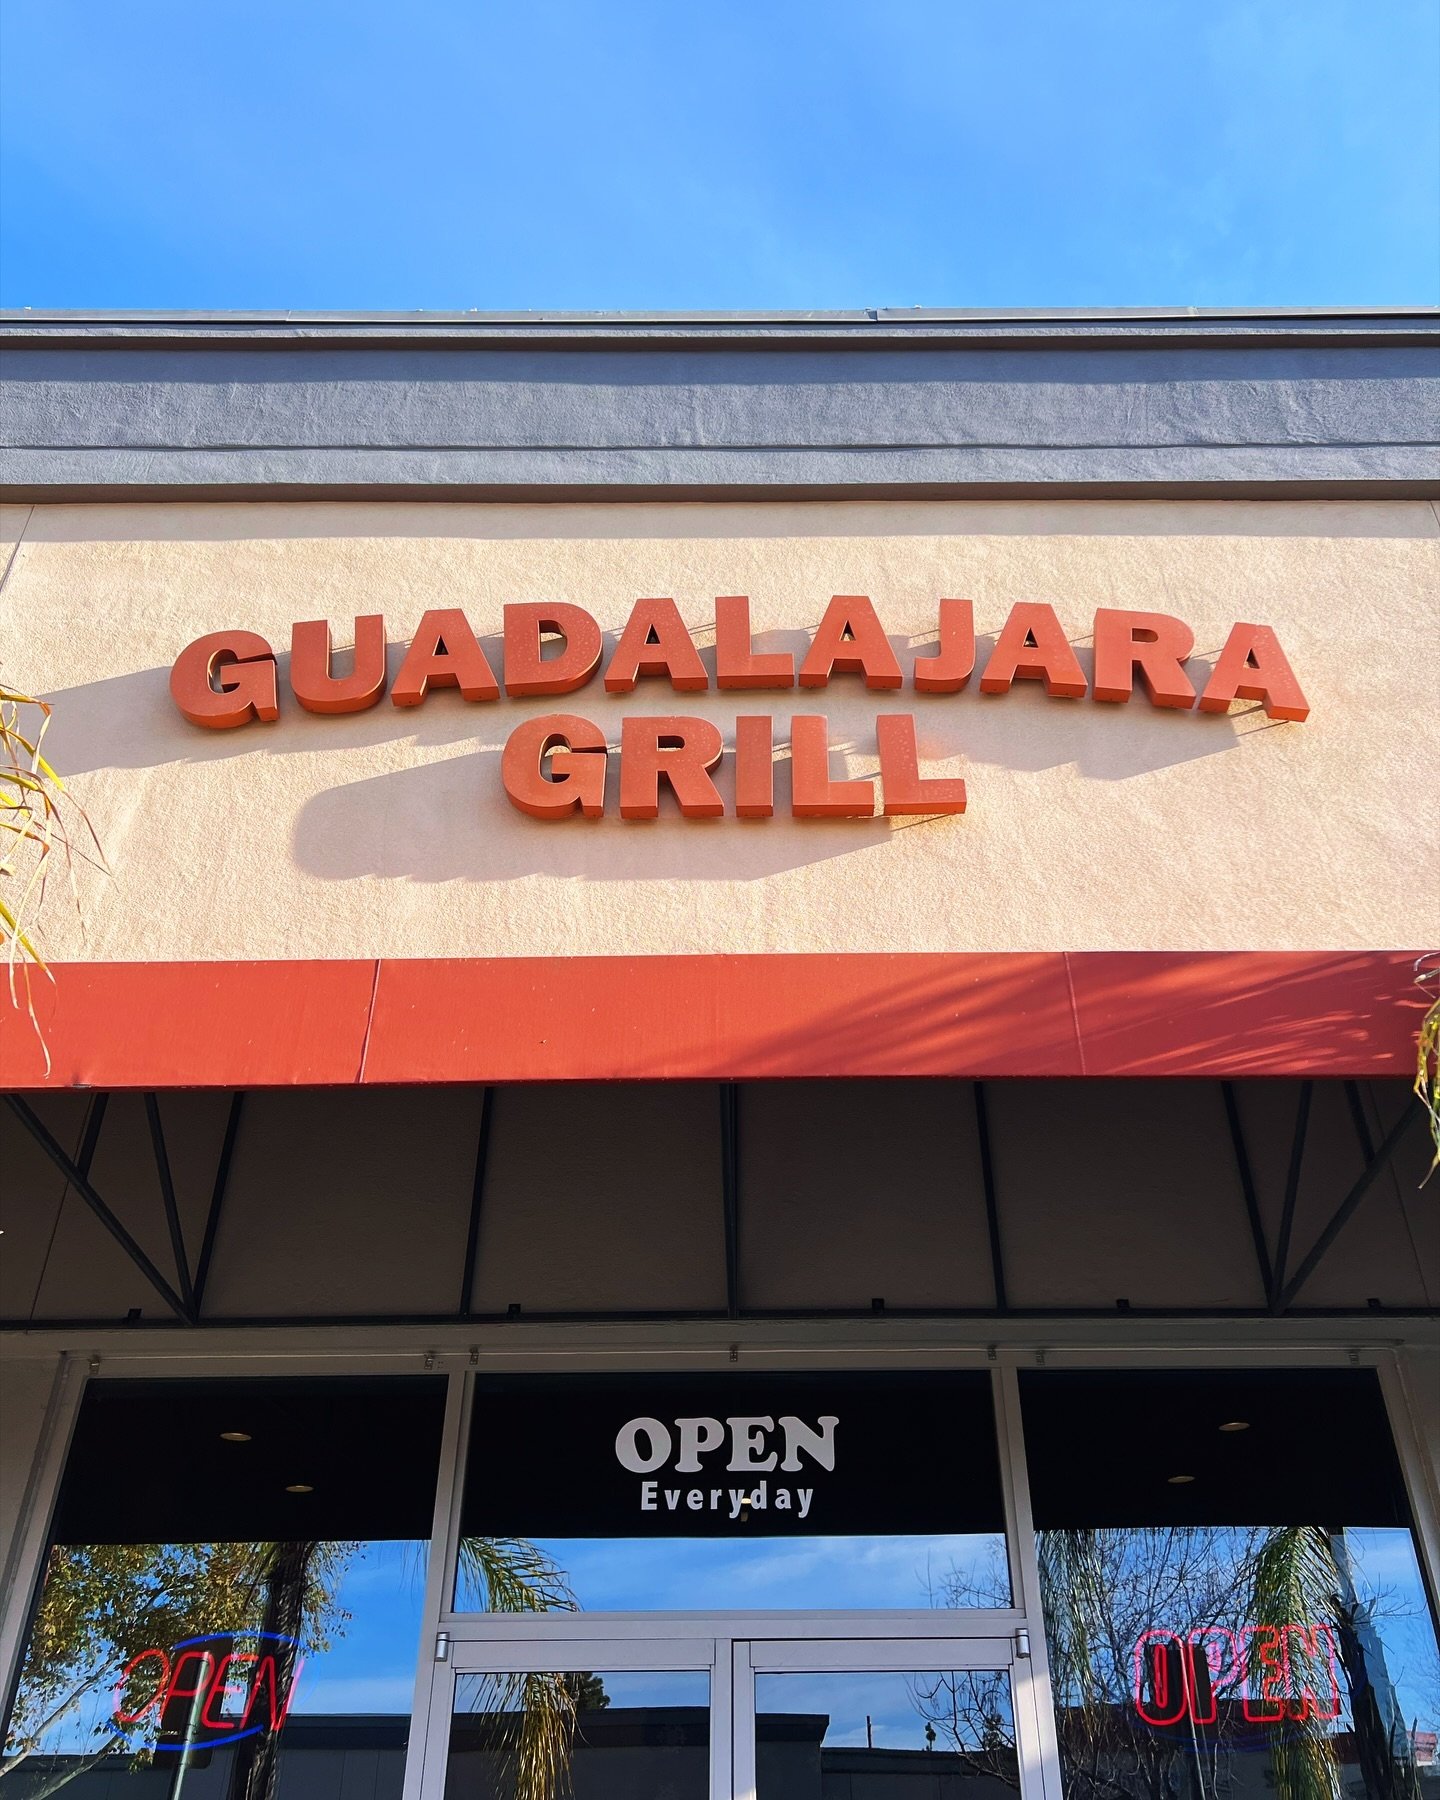 ONLINE ORDERING IS NOW LIVE!
Link in our bio ⬆️ to place an order online for pickup! 

#hotplatehotplate #guads #guadgrill #onlineordering #supportsmallbusiness #concordca #visitconcordca #concordeats #eastbayeats #mexicanfood #familyowned